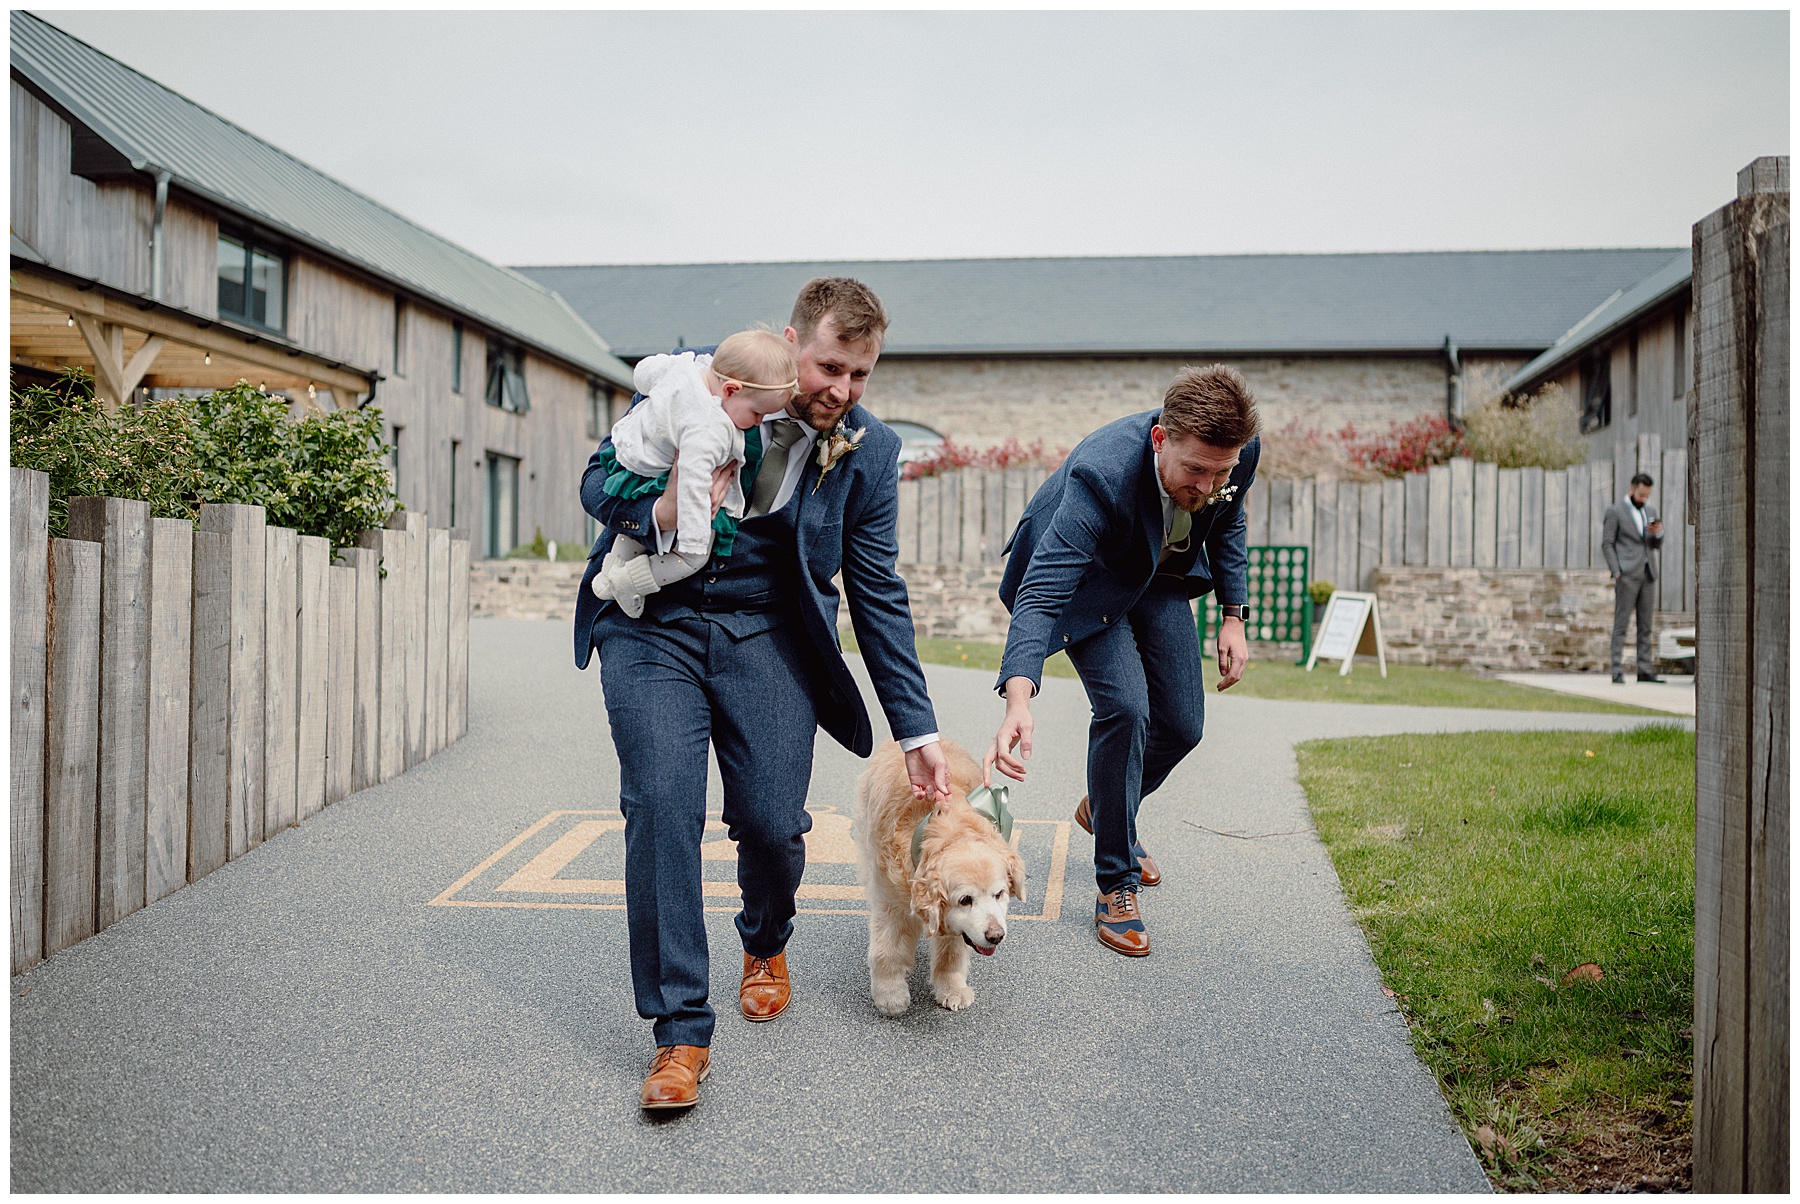 Groom with Dogs at Courtyard Wales